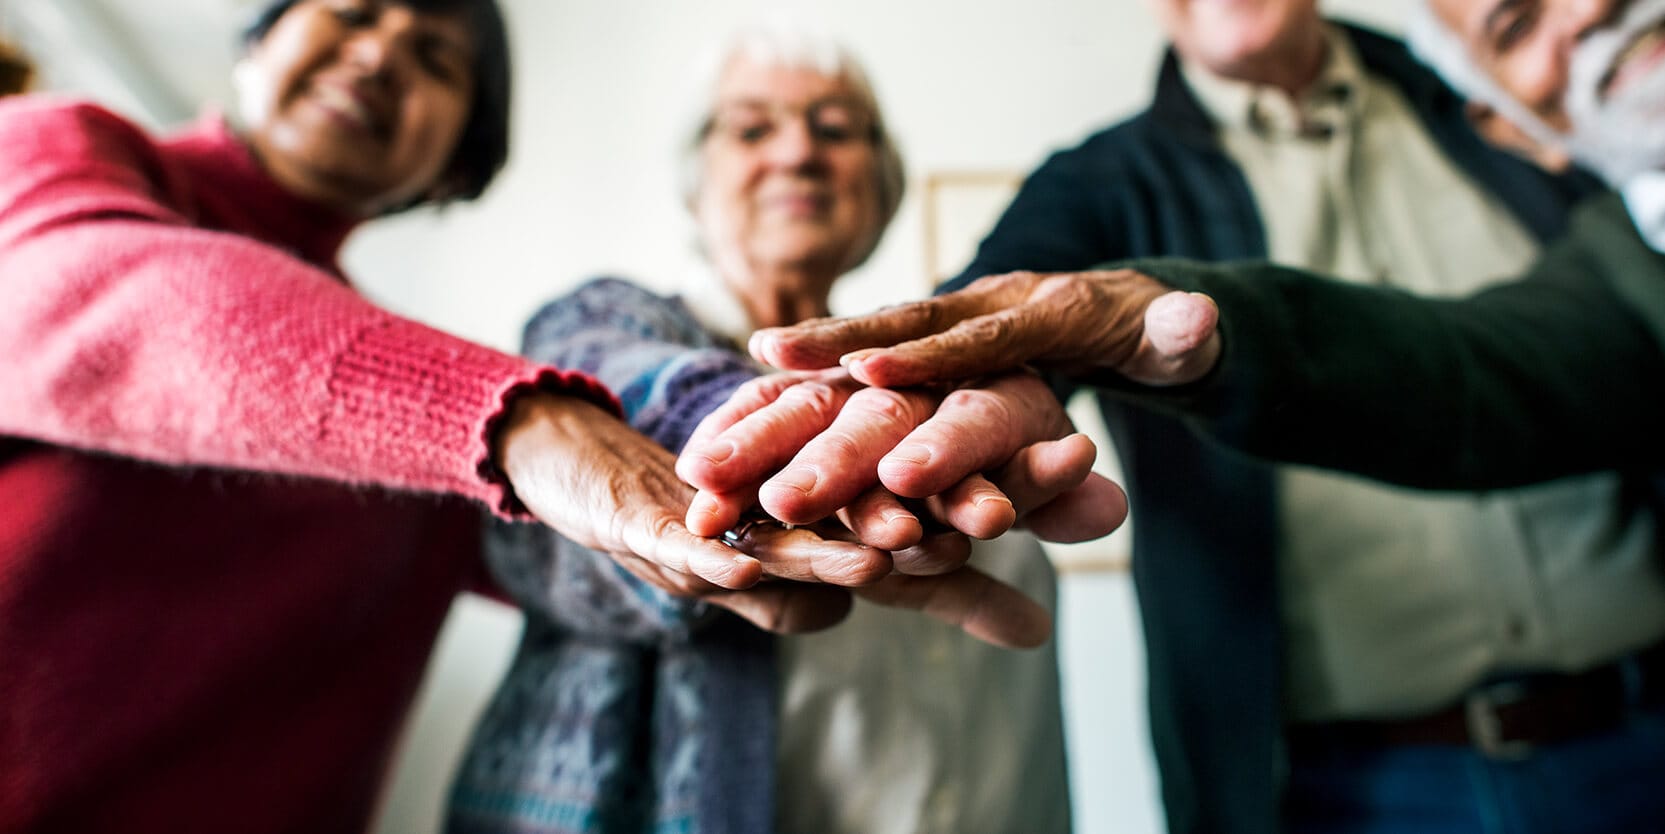 Group of elderly people with their hands together.